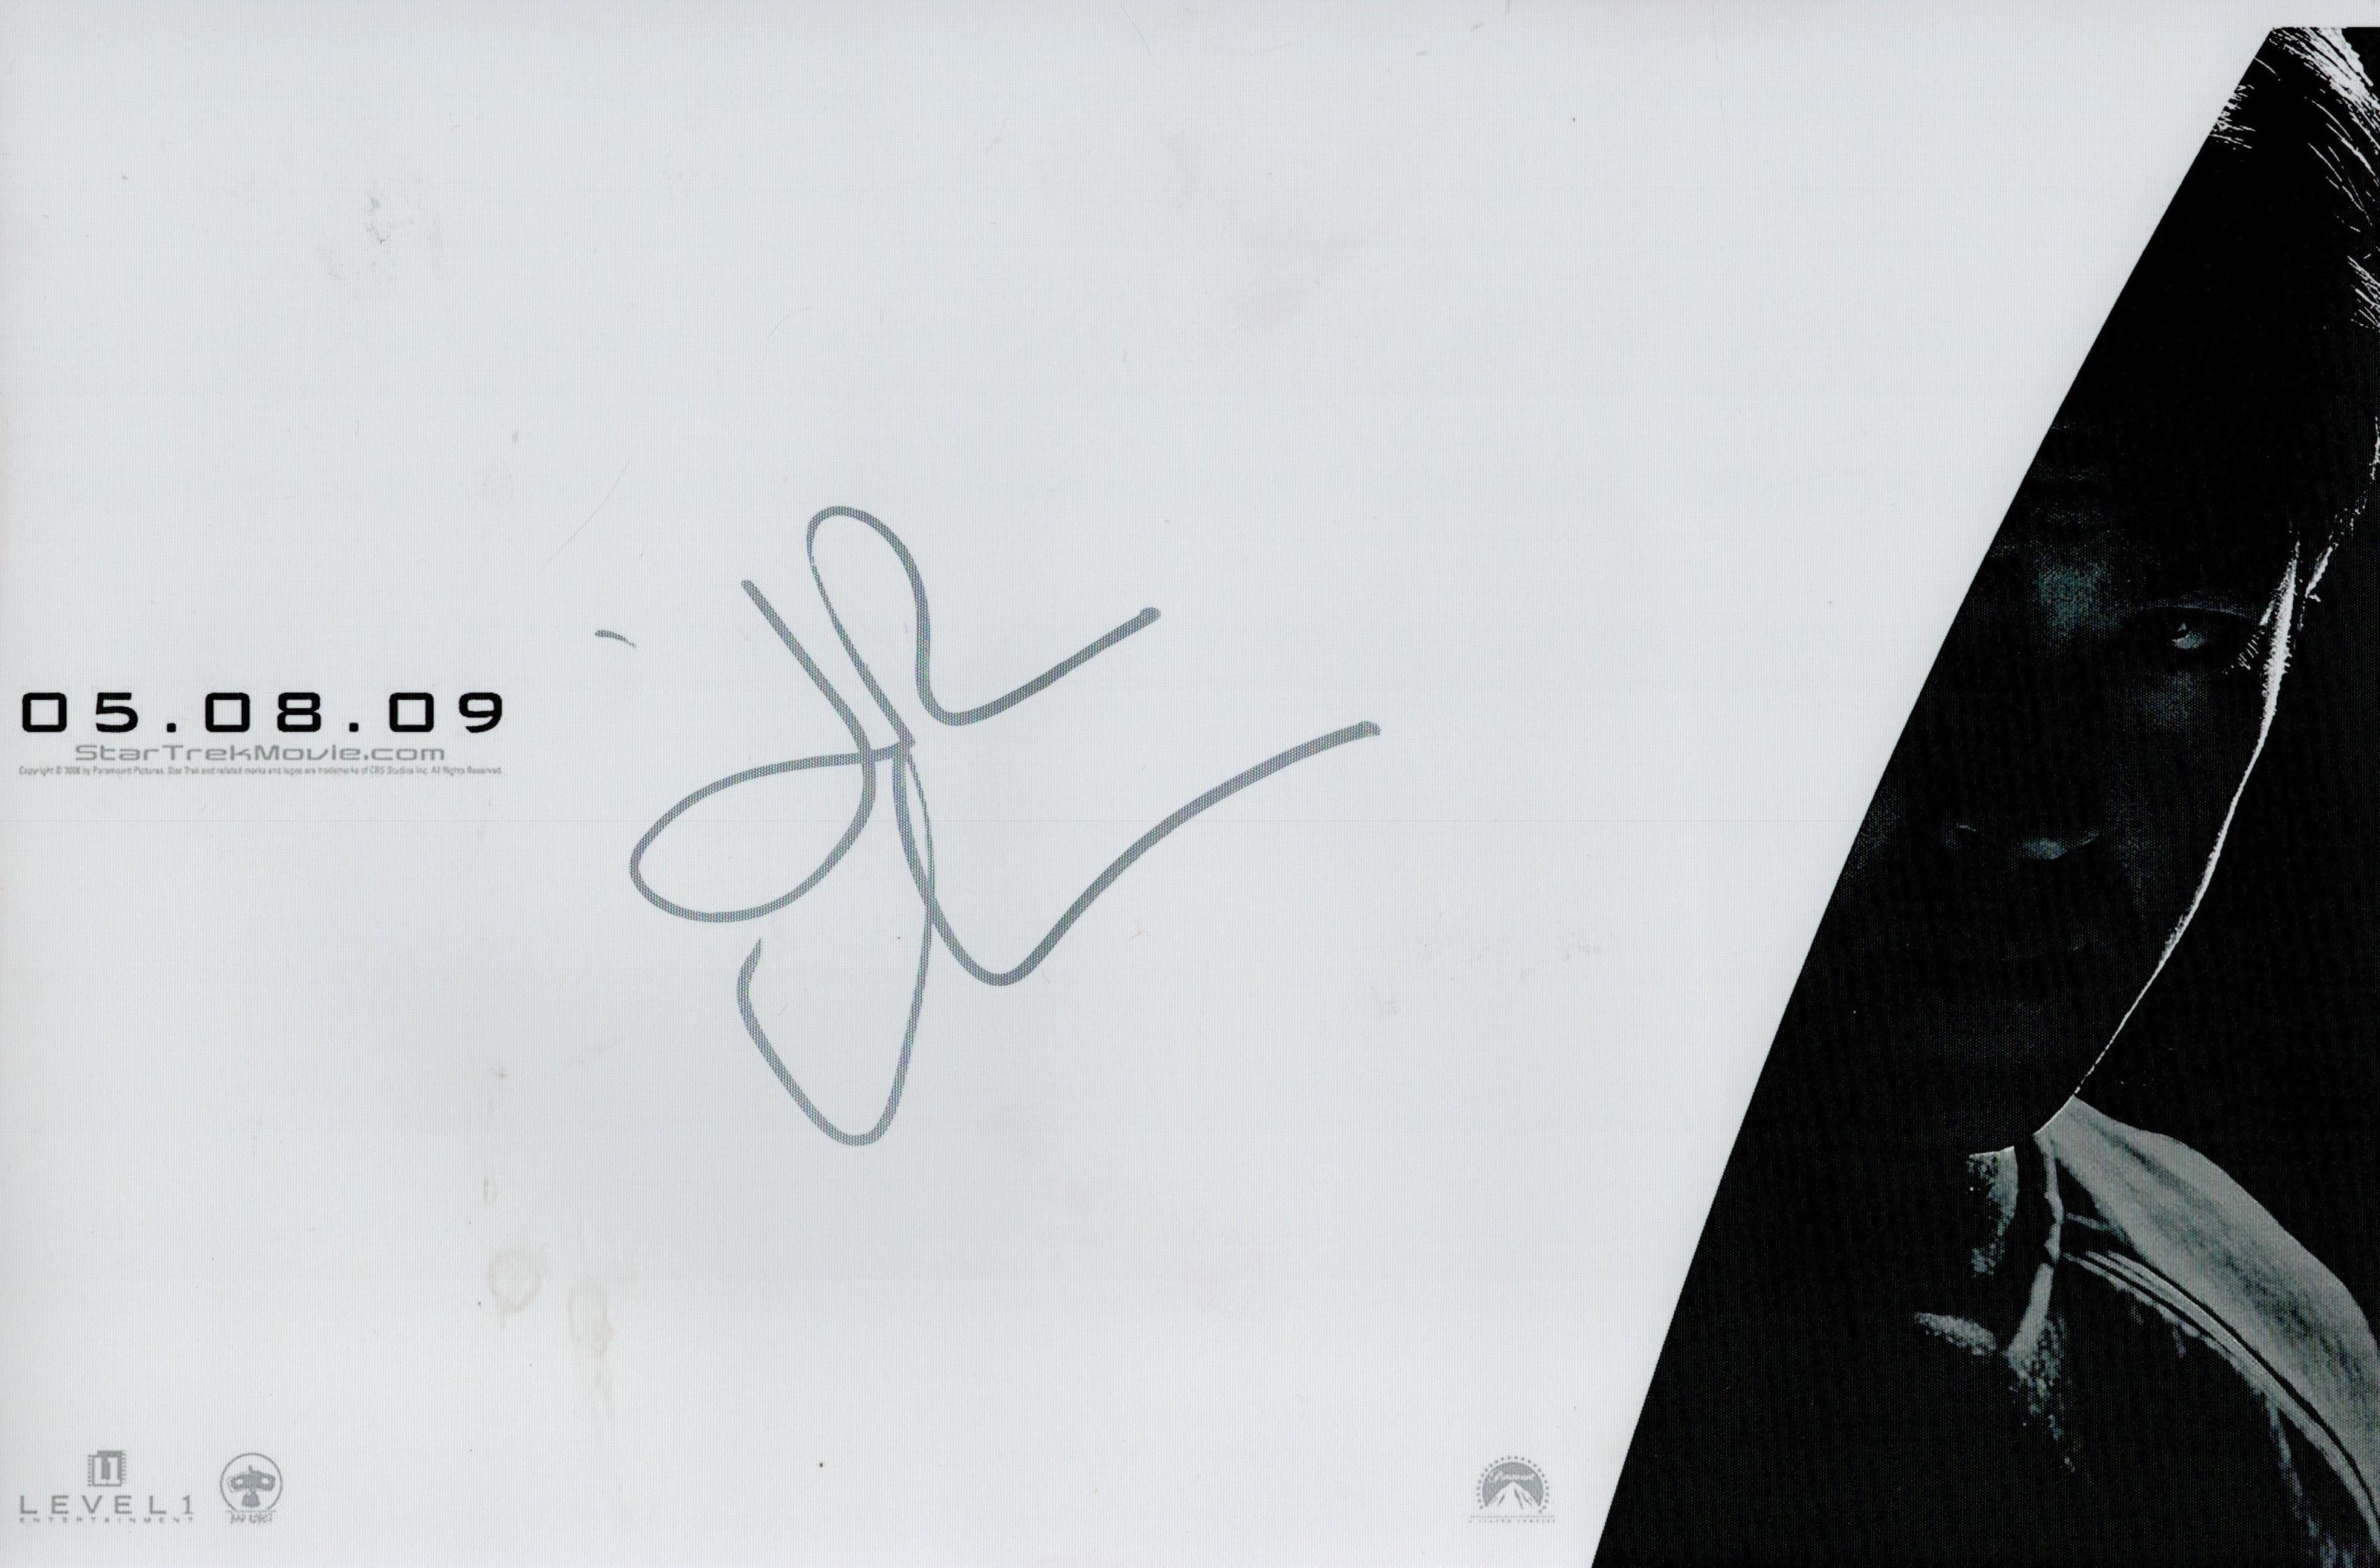 John Cho Signed Black and White Photo American Actor-05. 08. 09 Star Trek Approx. Size 12 x 8 IN.